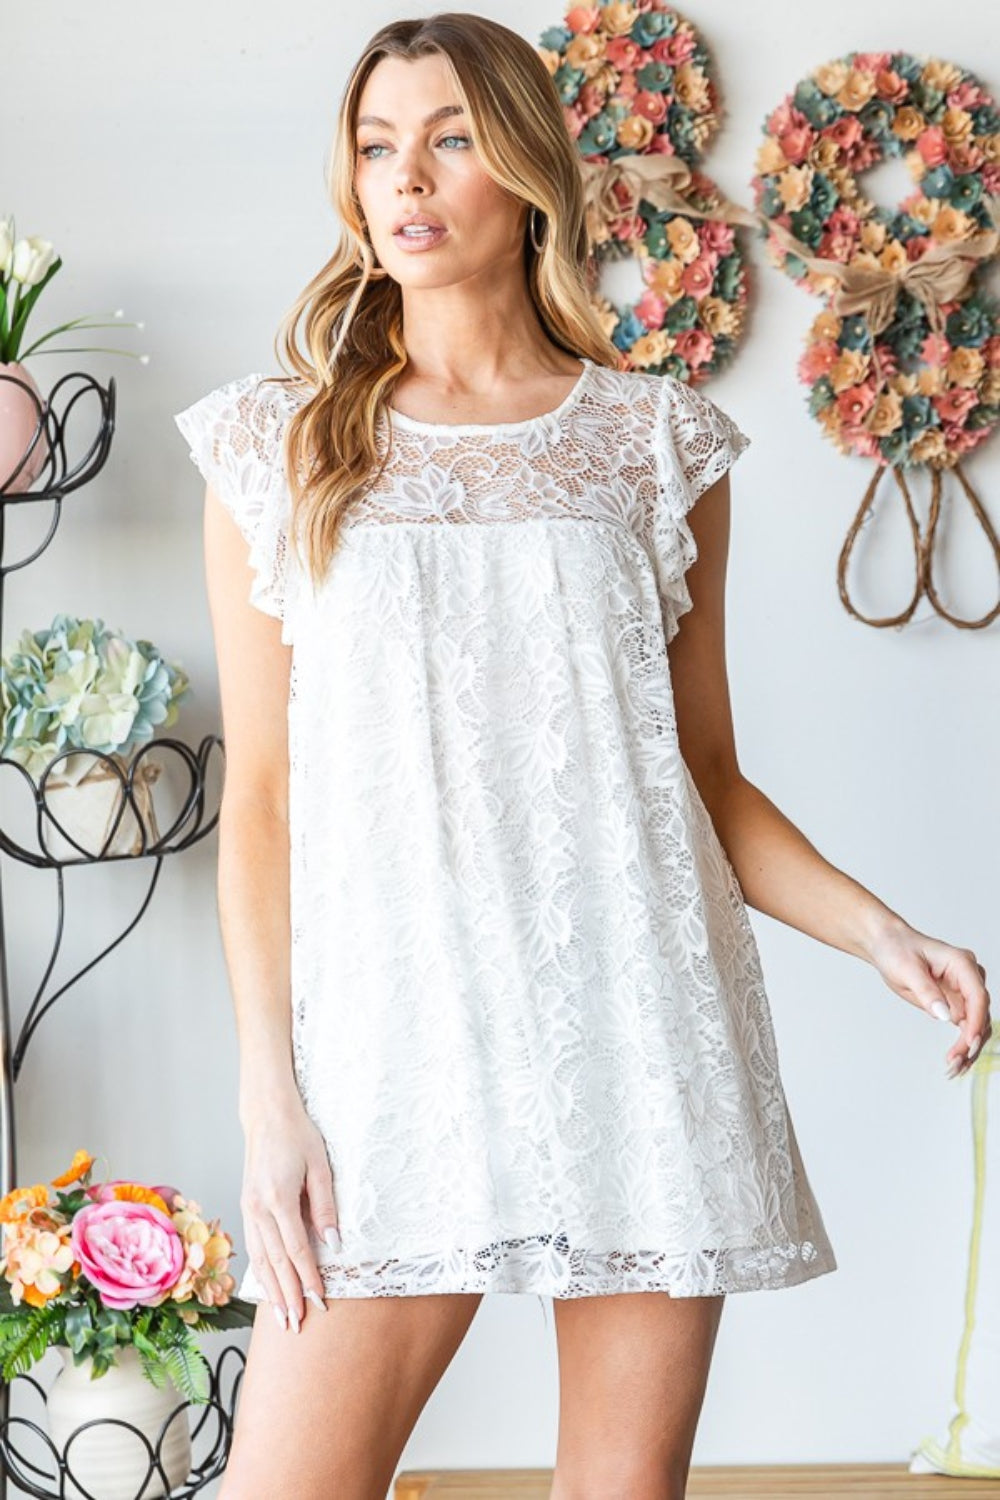 Heimish Full Size Round Neck Cap Sleeve Lace Top | us.meeeshop